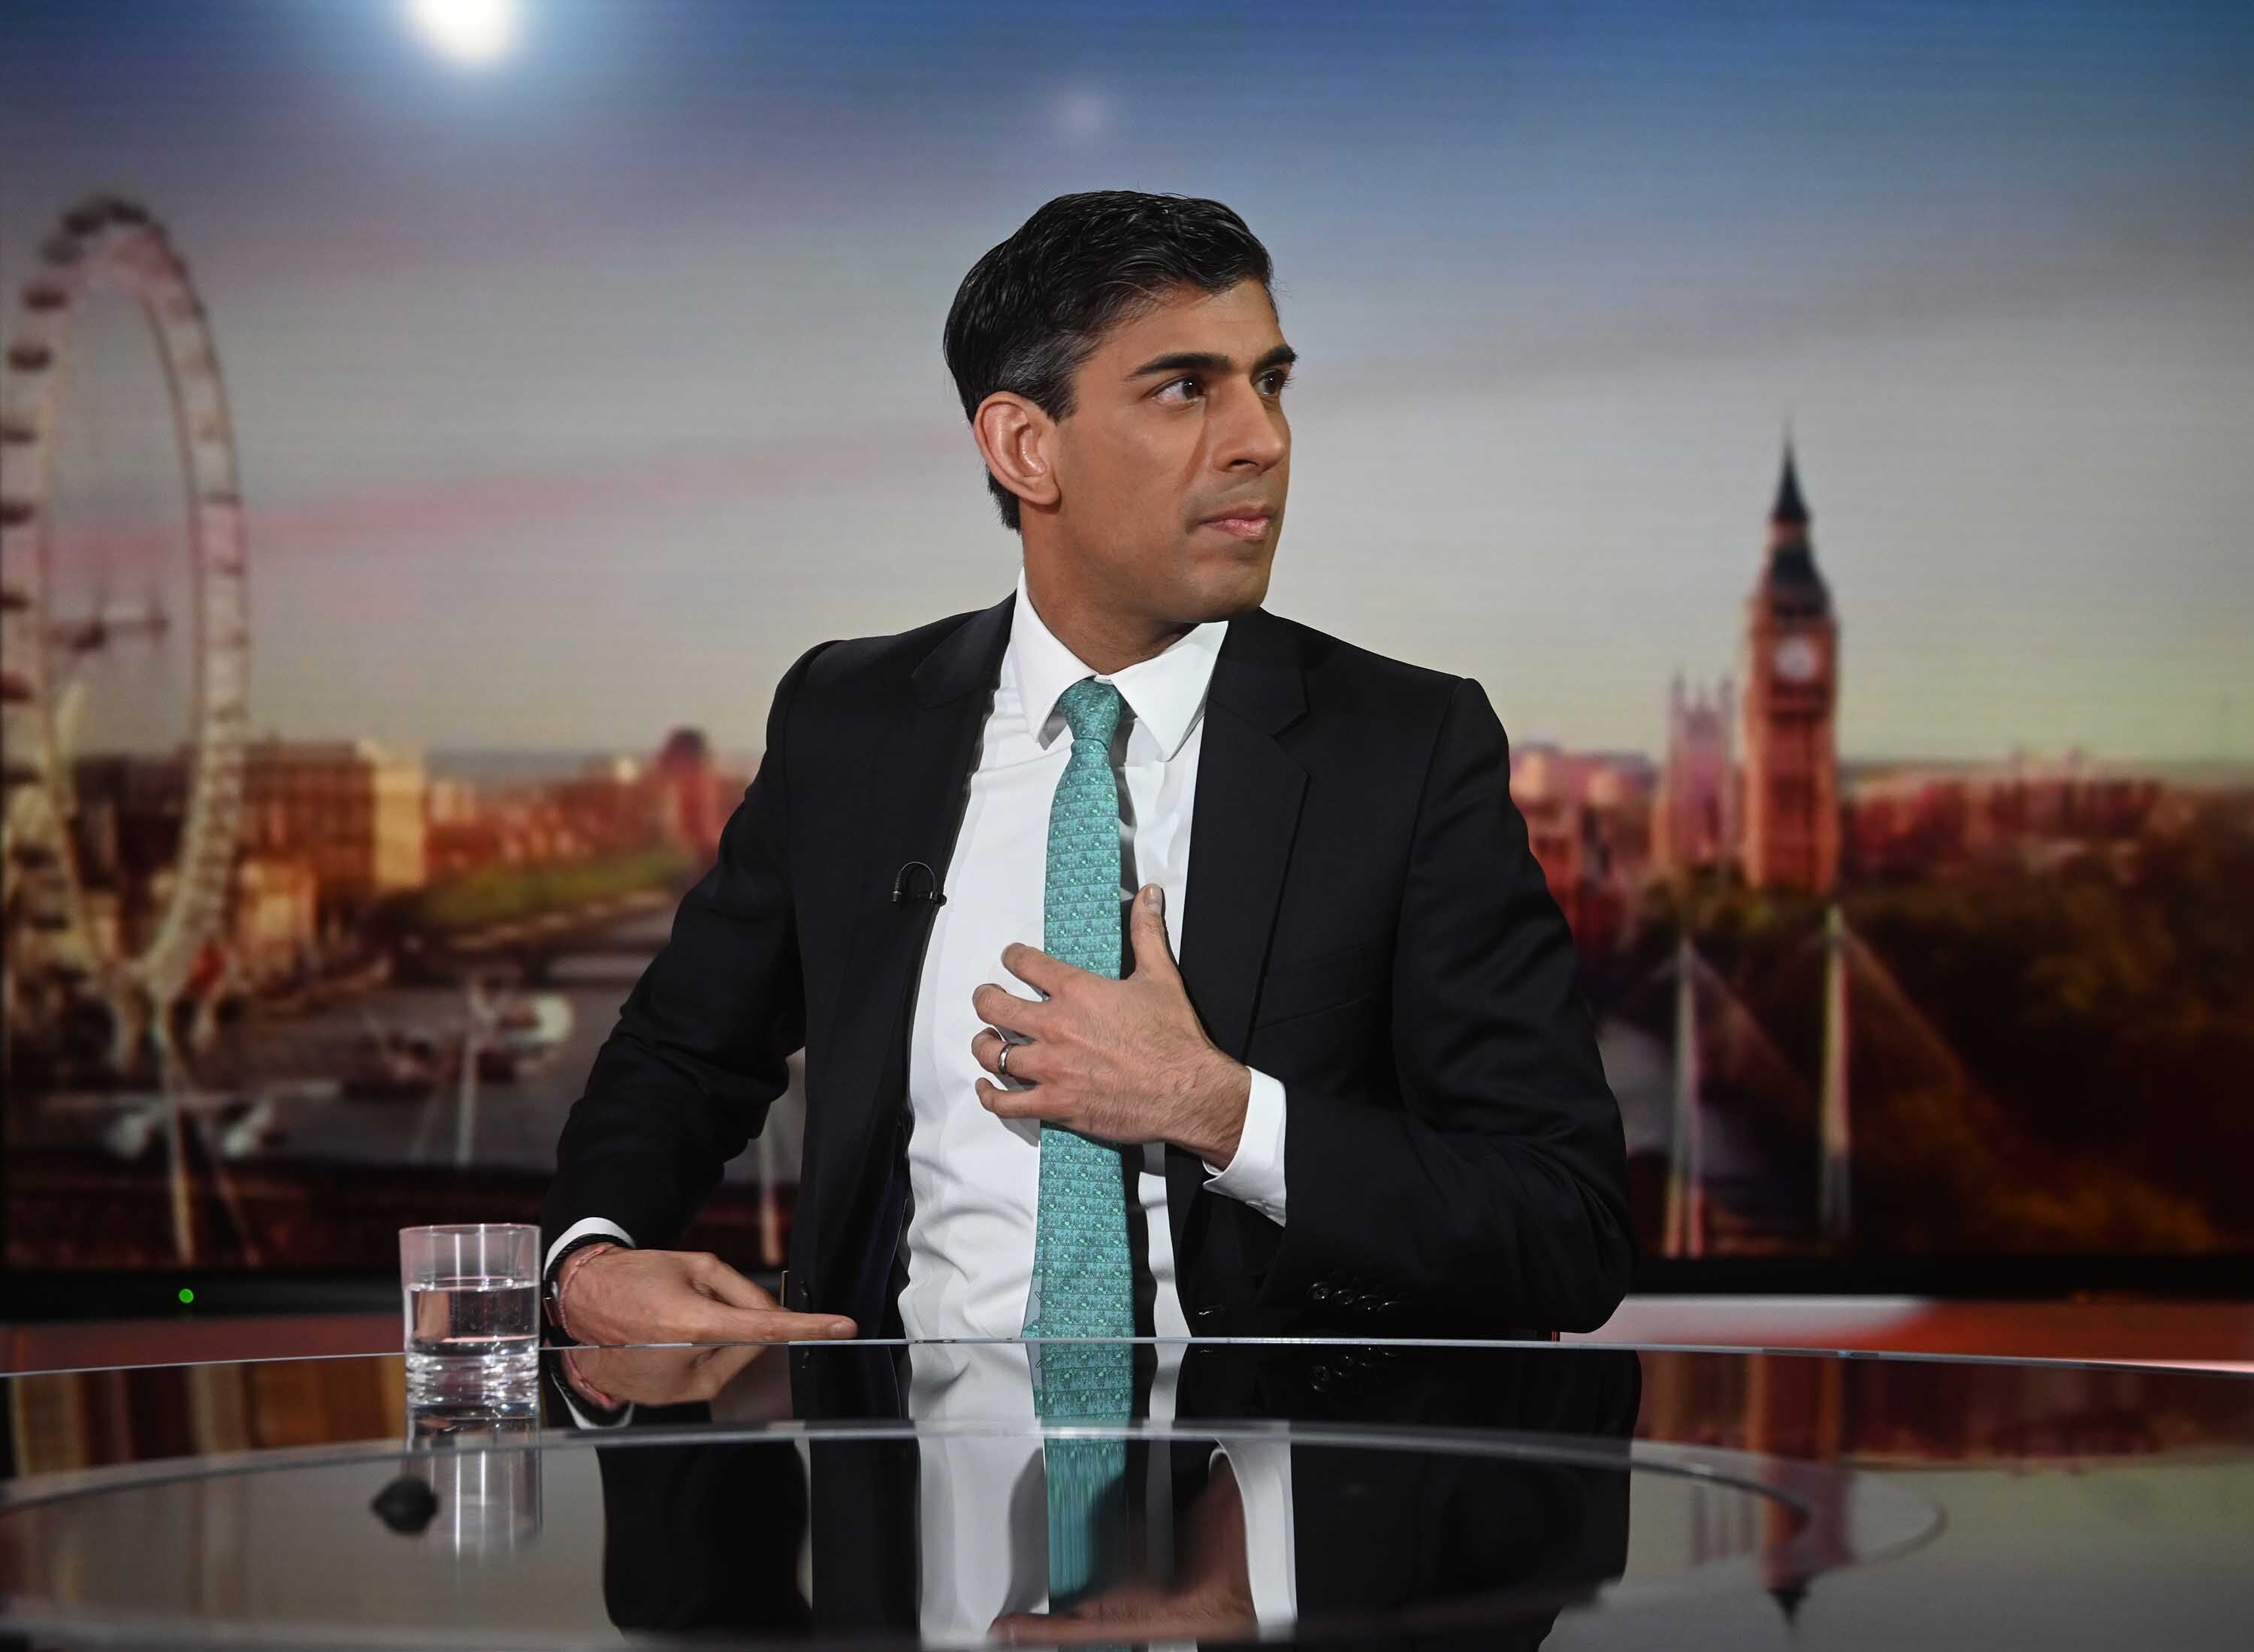 Chancellor Rishi Sunak faces a fresh 30-year high inflation print ahead of his Spring Statement.